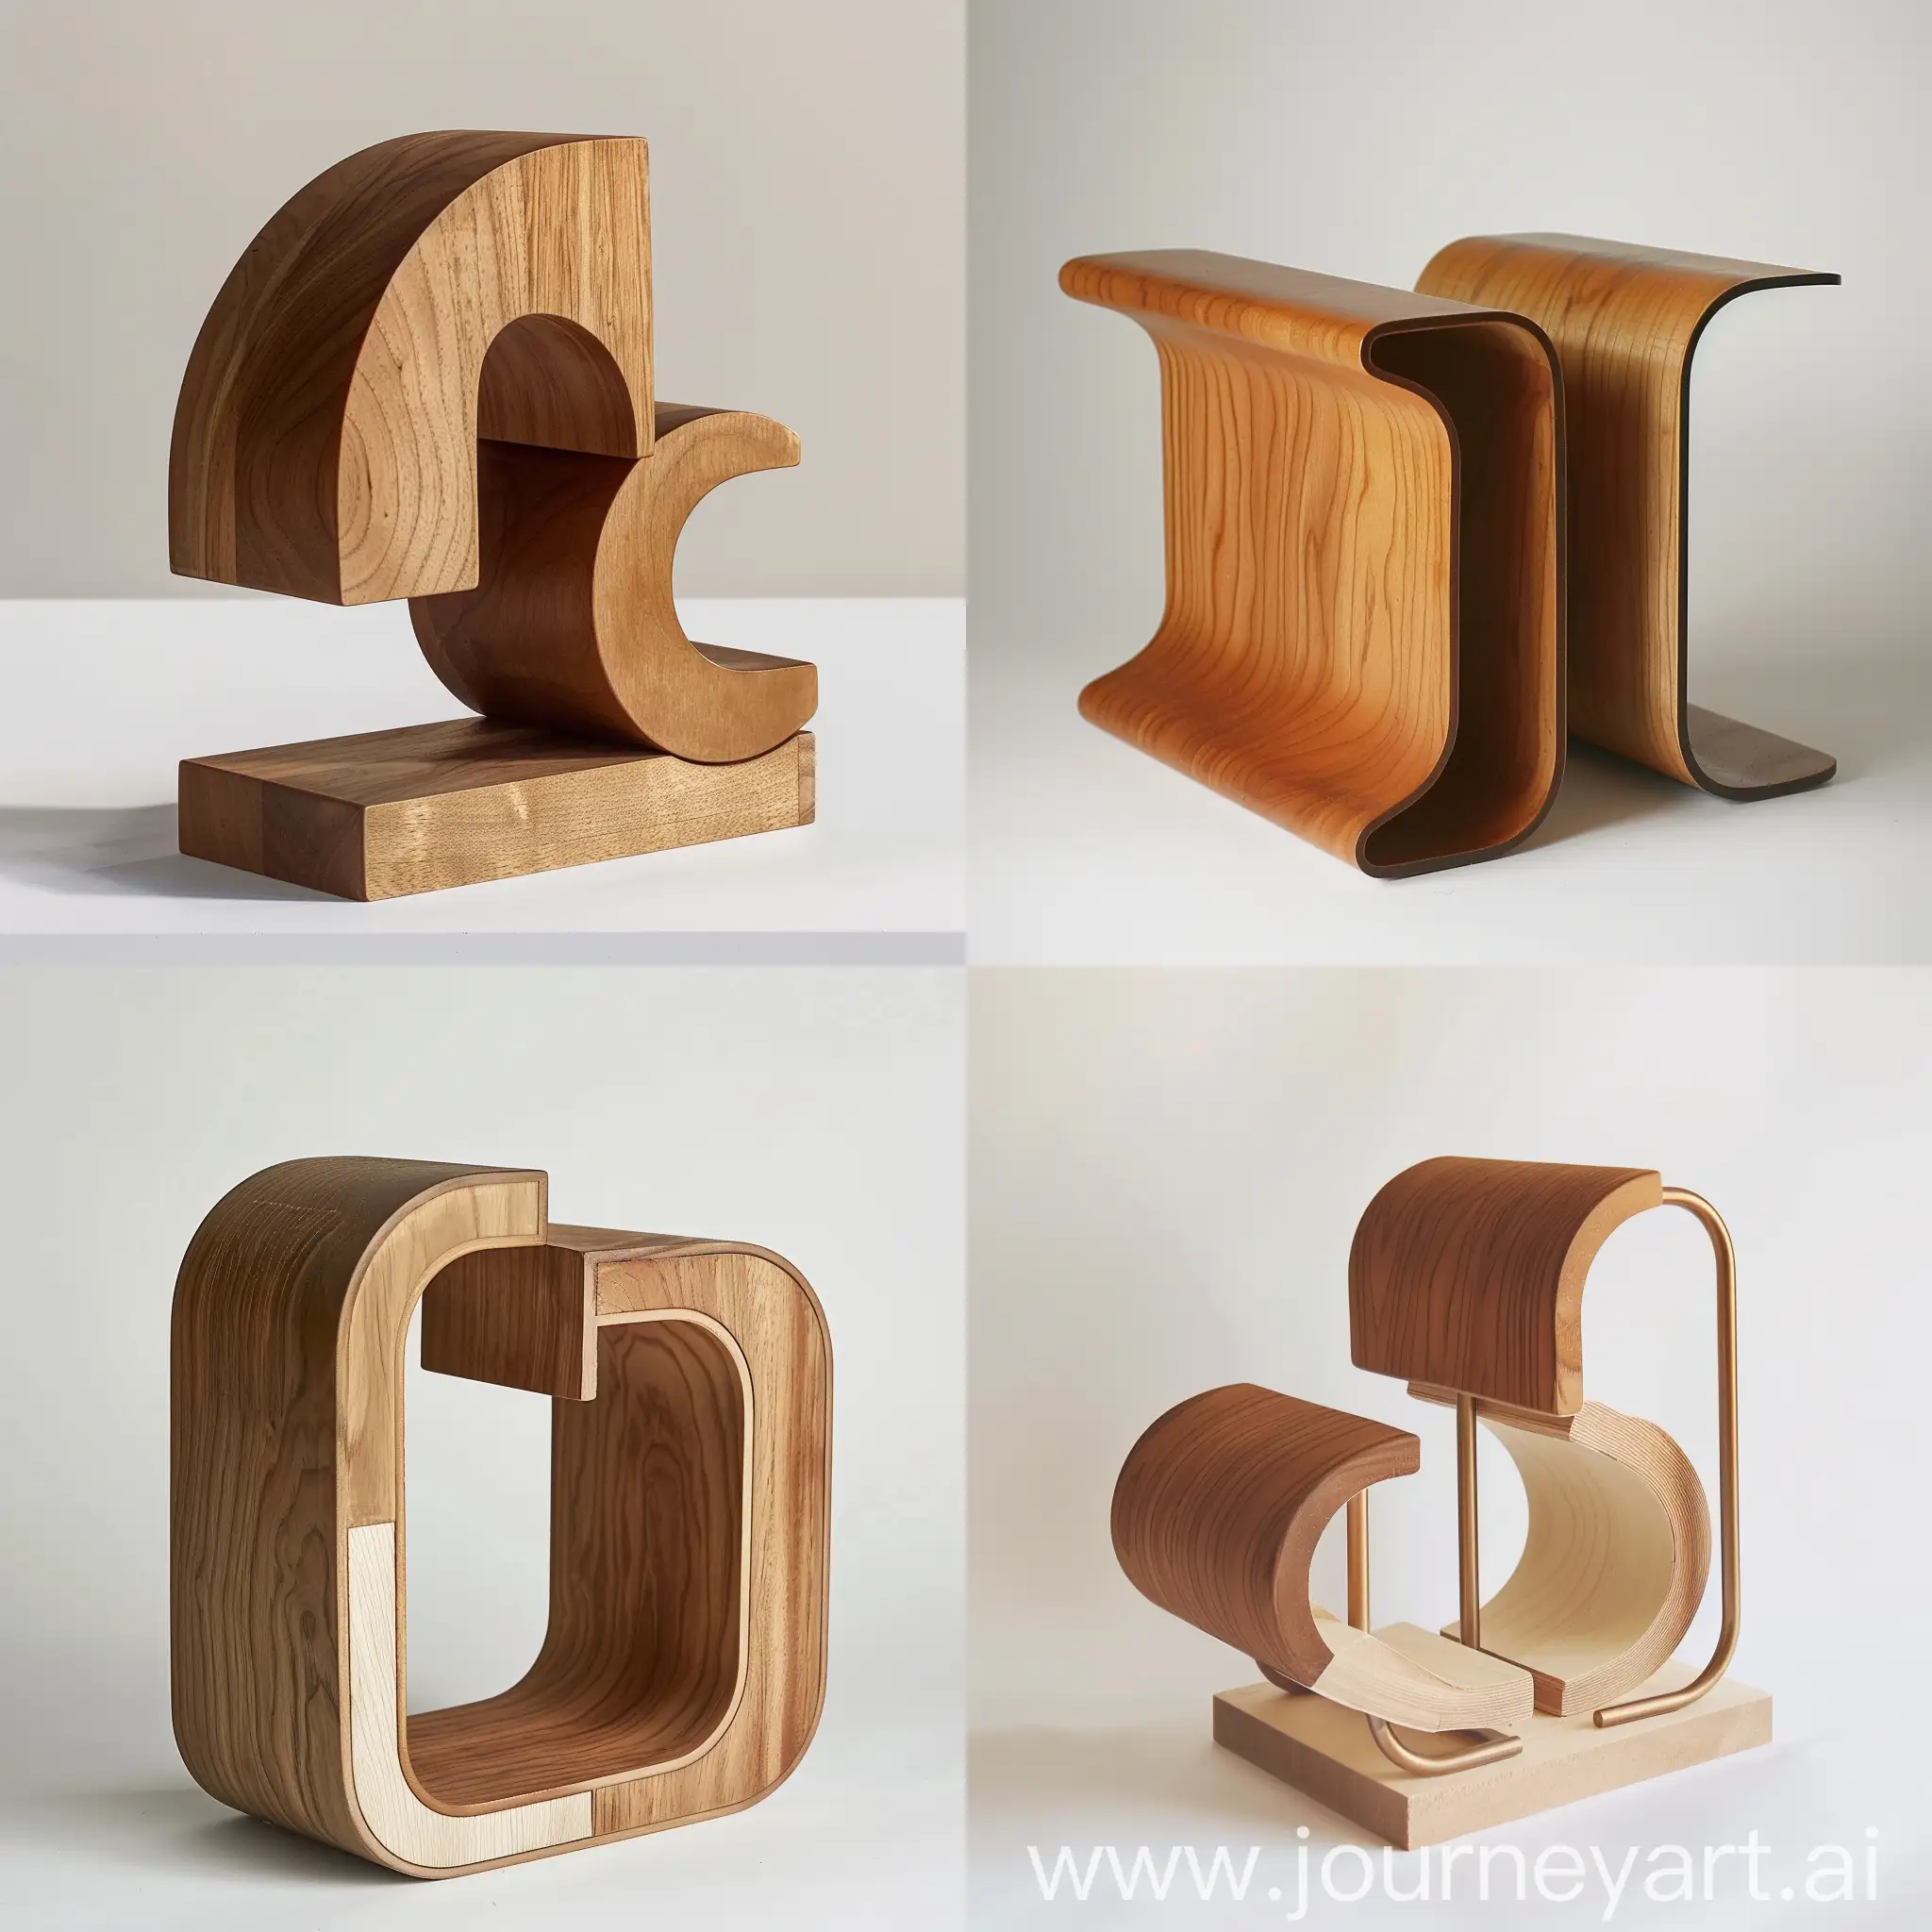 Minimalist-MidCentury-Modern-Bookend-Inspired-by-George-Nelson